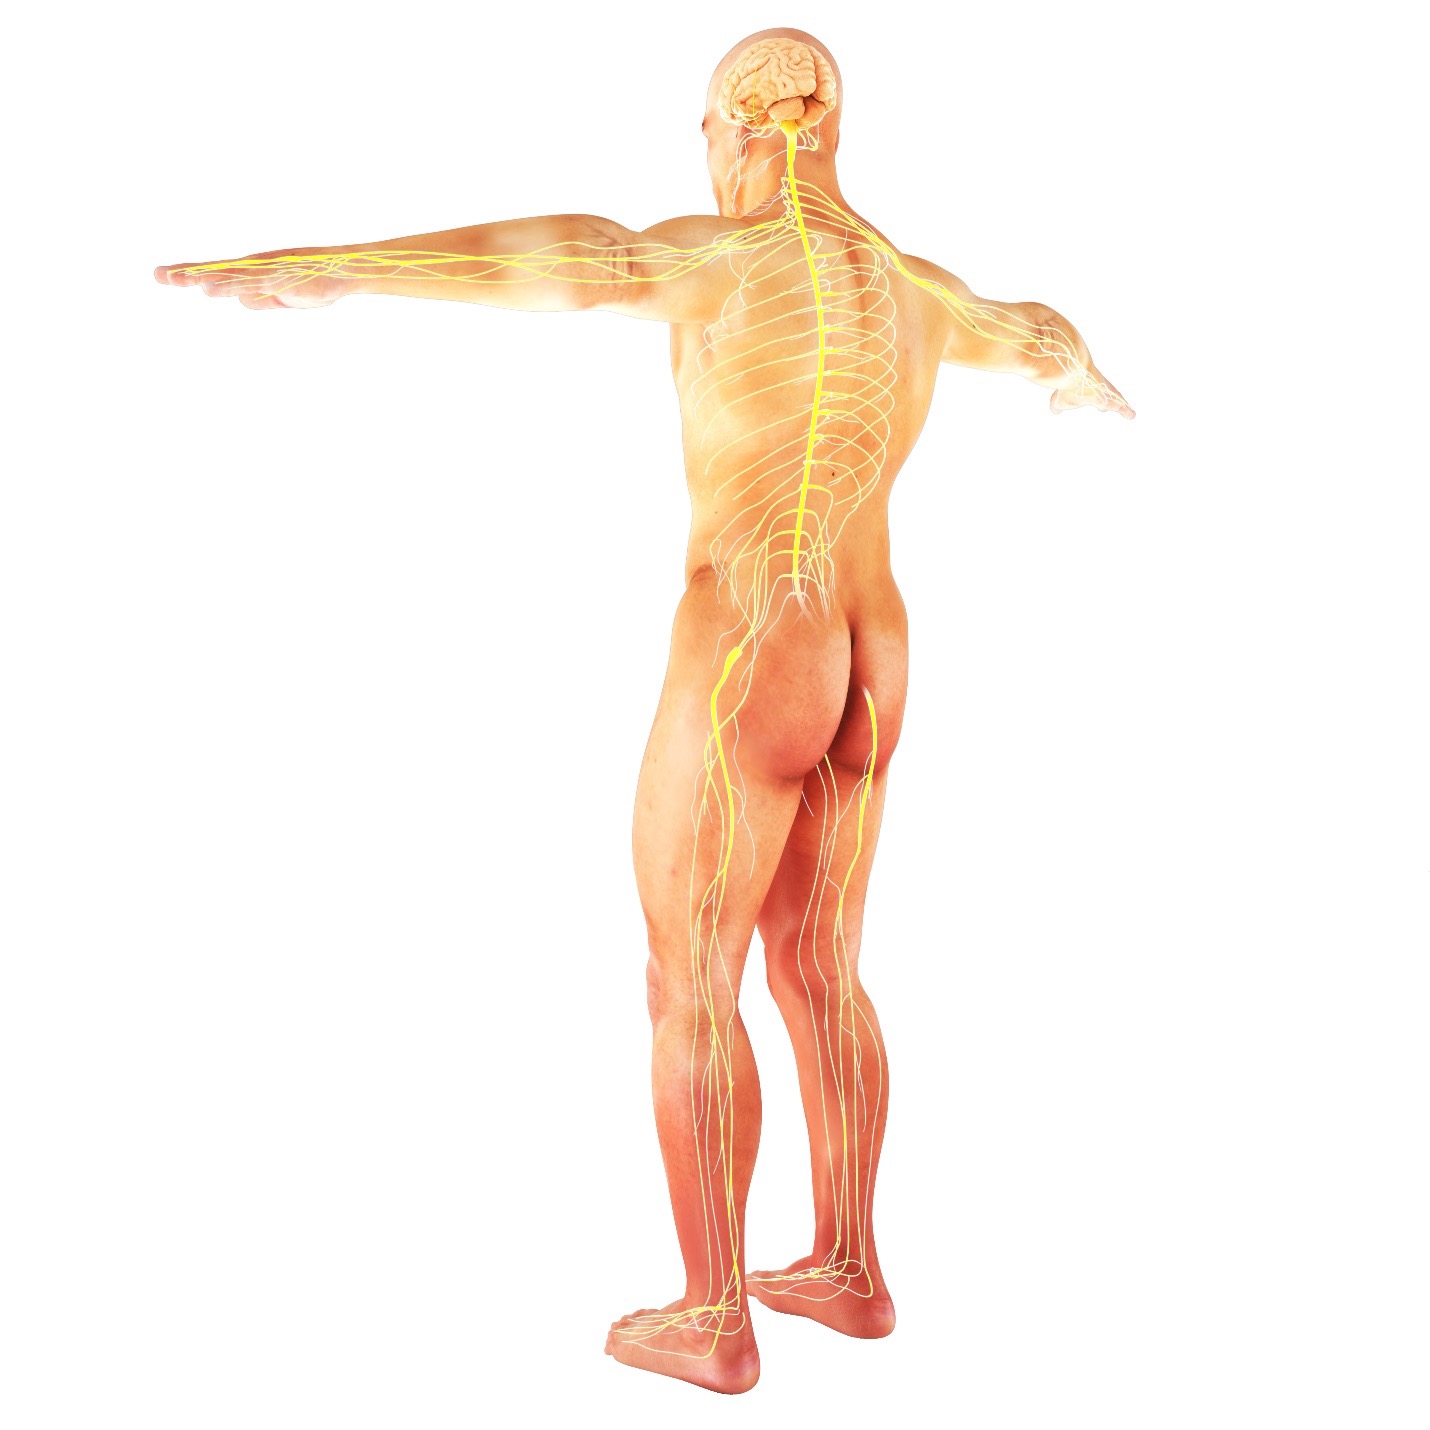 Body with nerve trail to organs showing alignment from chiro care